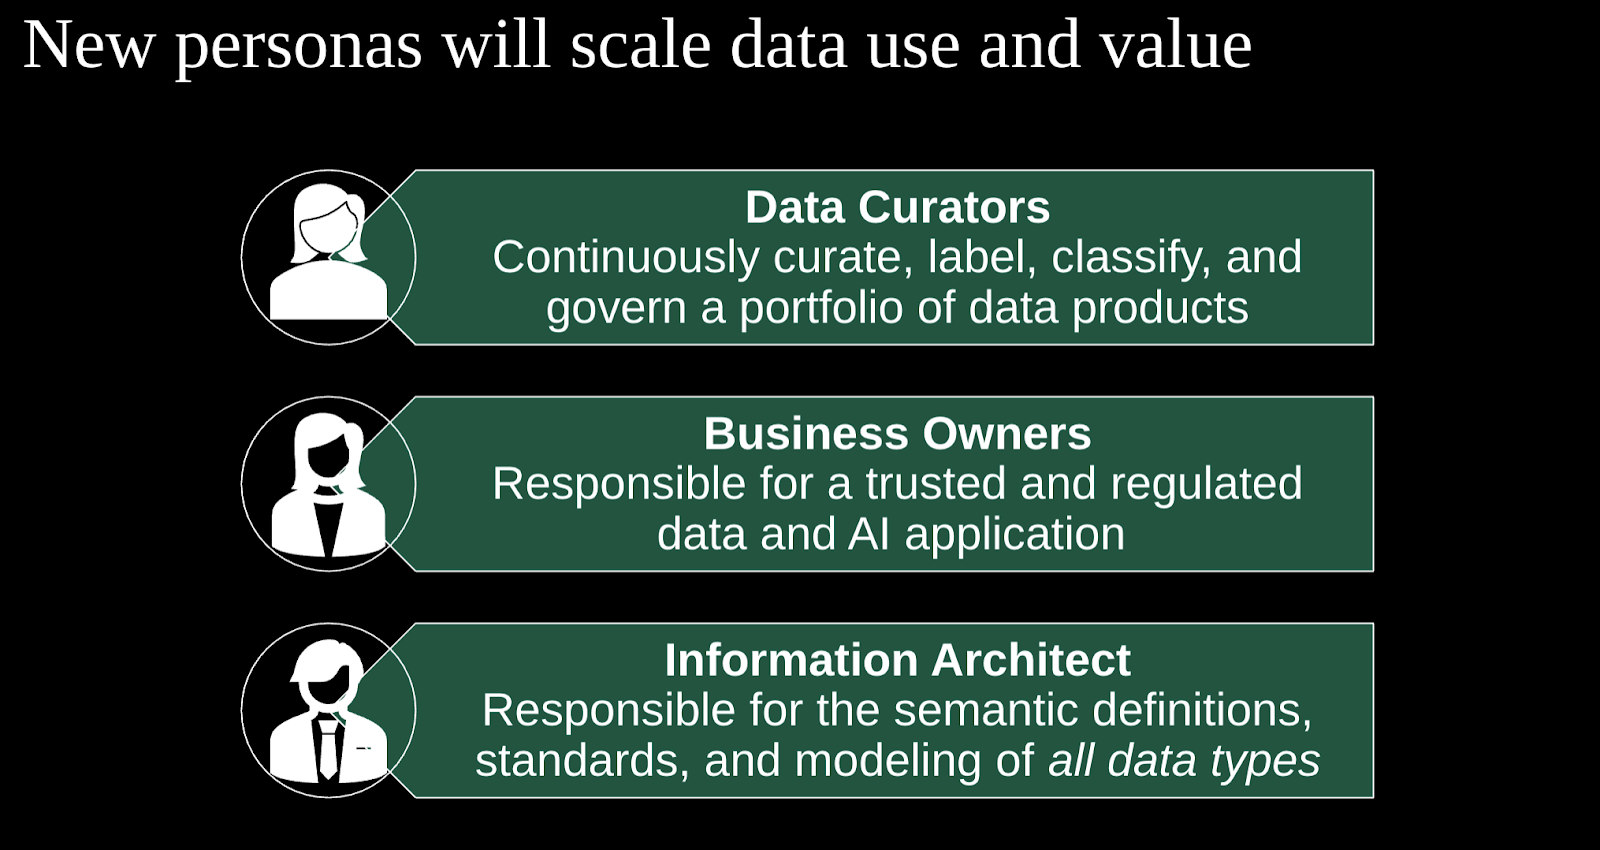 Image showing the new personas needed to scale data use and value as it relates to AI